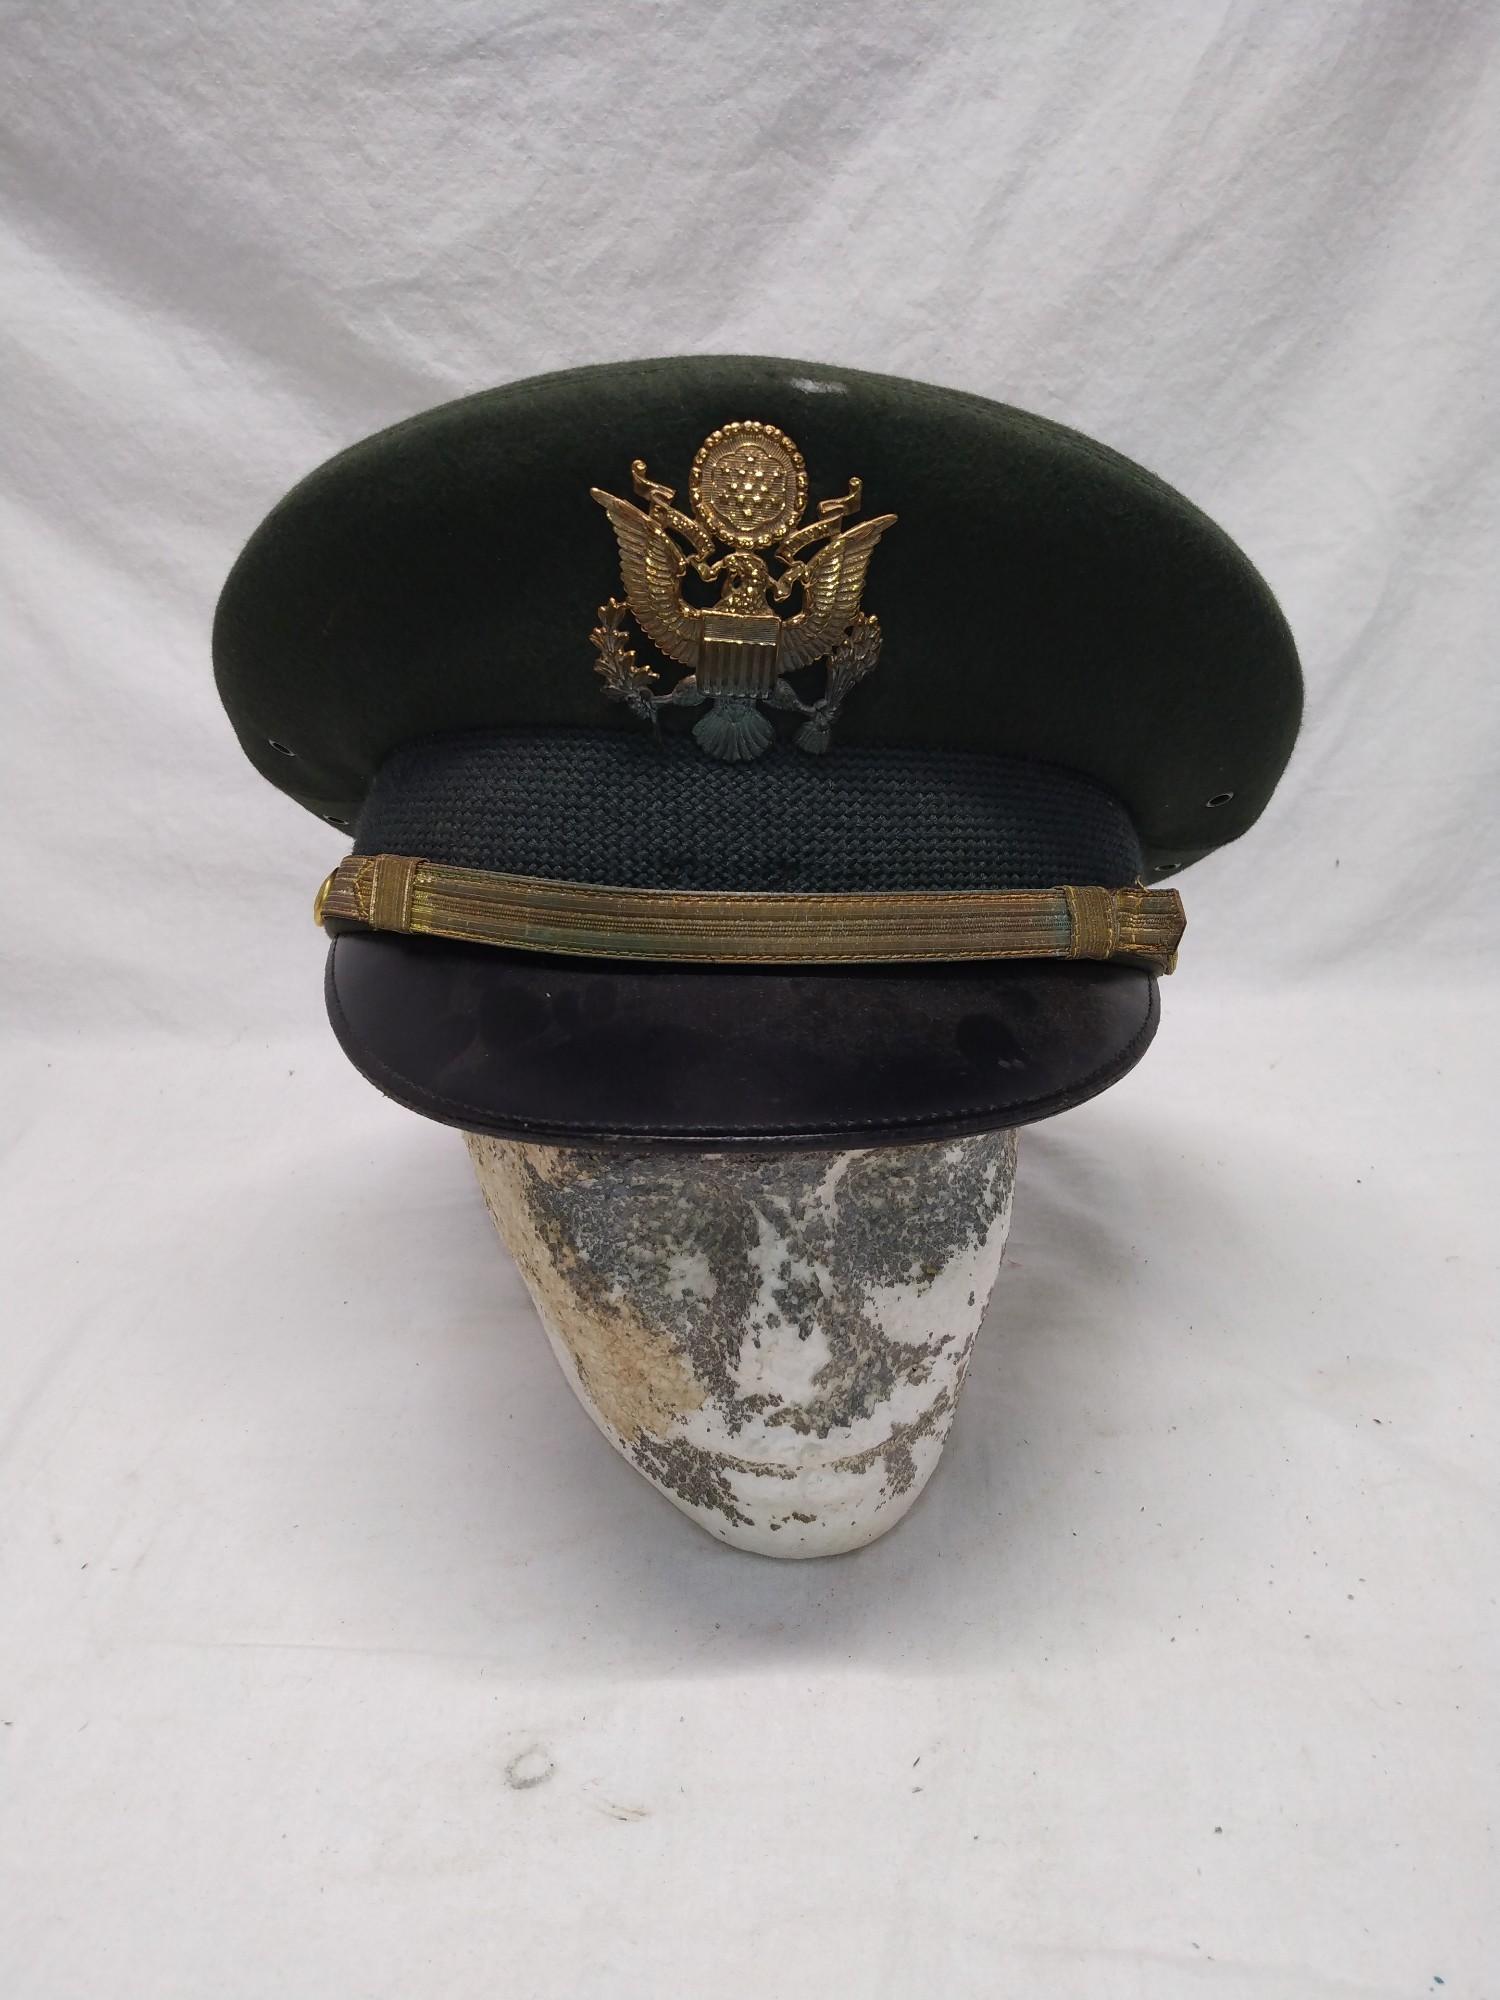 US Army officers visor hat